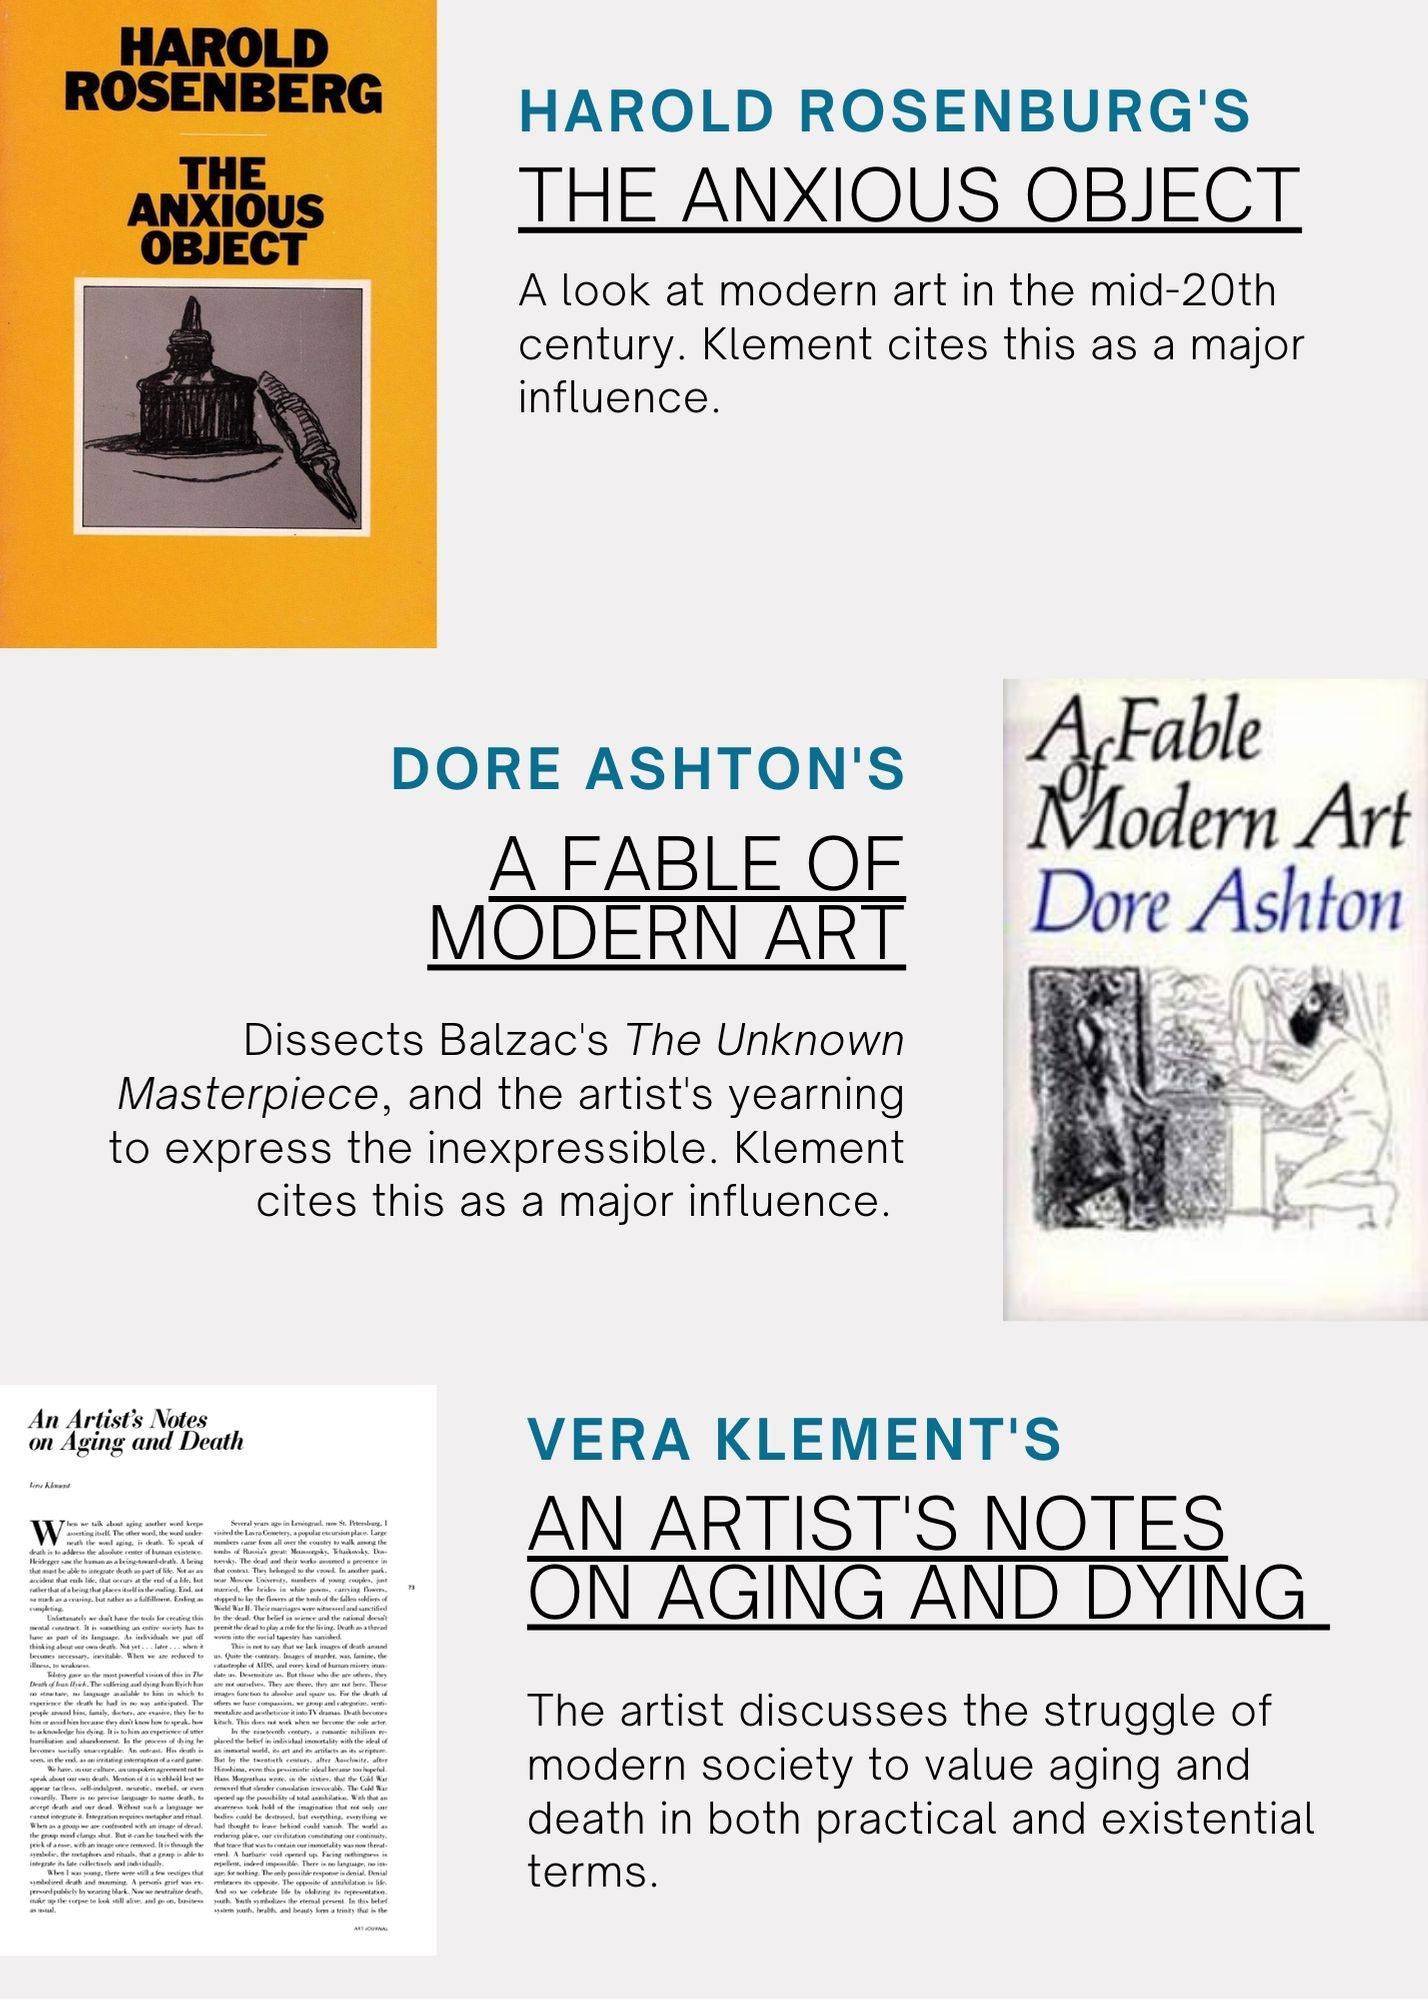 three book covers, Harold Rosenberg's The Anxious Object, Dore Ashton's A Fable of Modern Art, and Vera Klement's An Artist's Notes on Aging and Dying